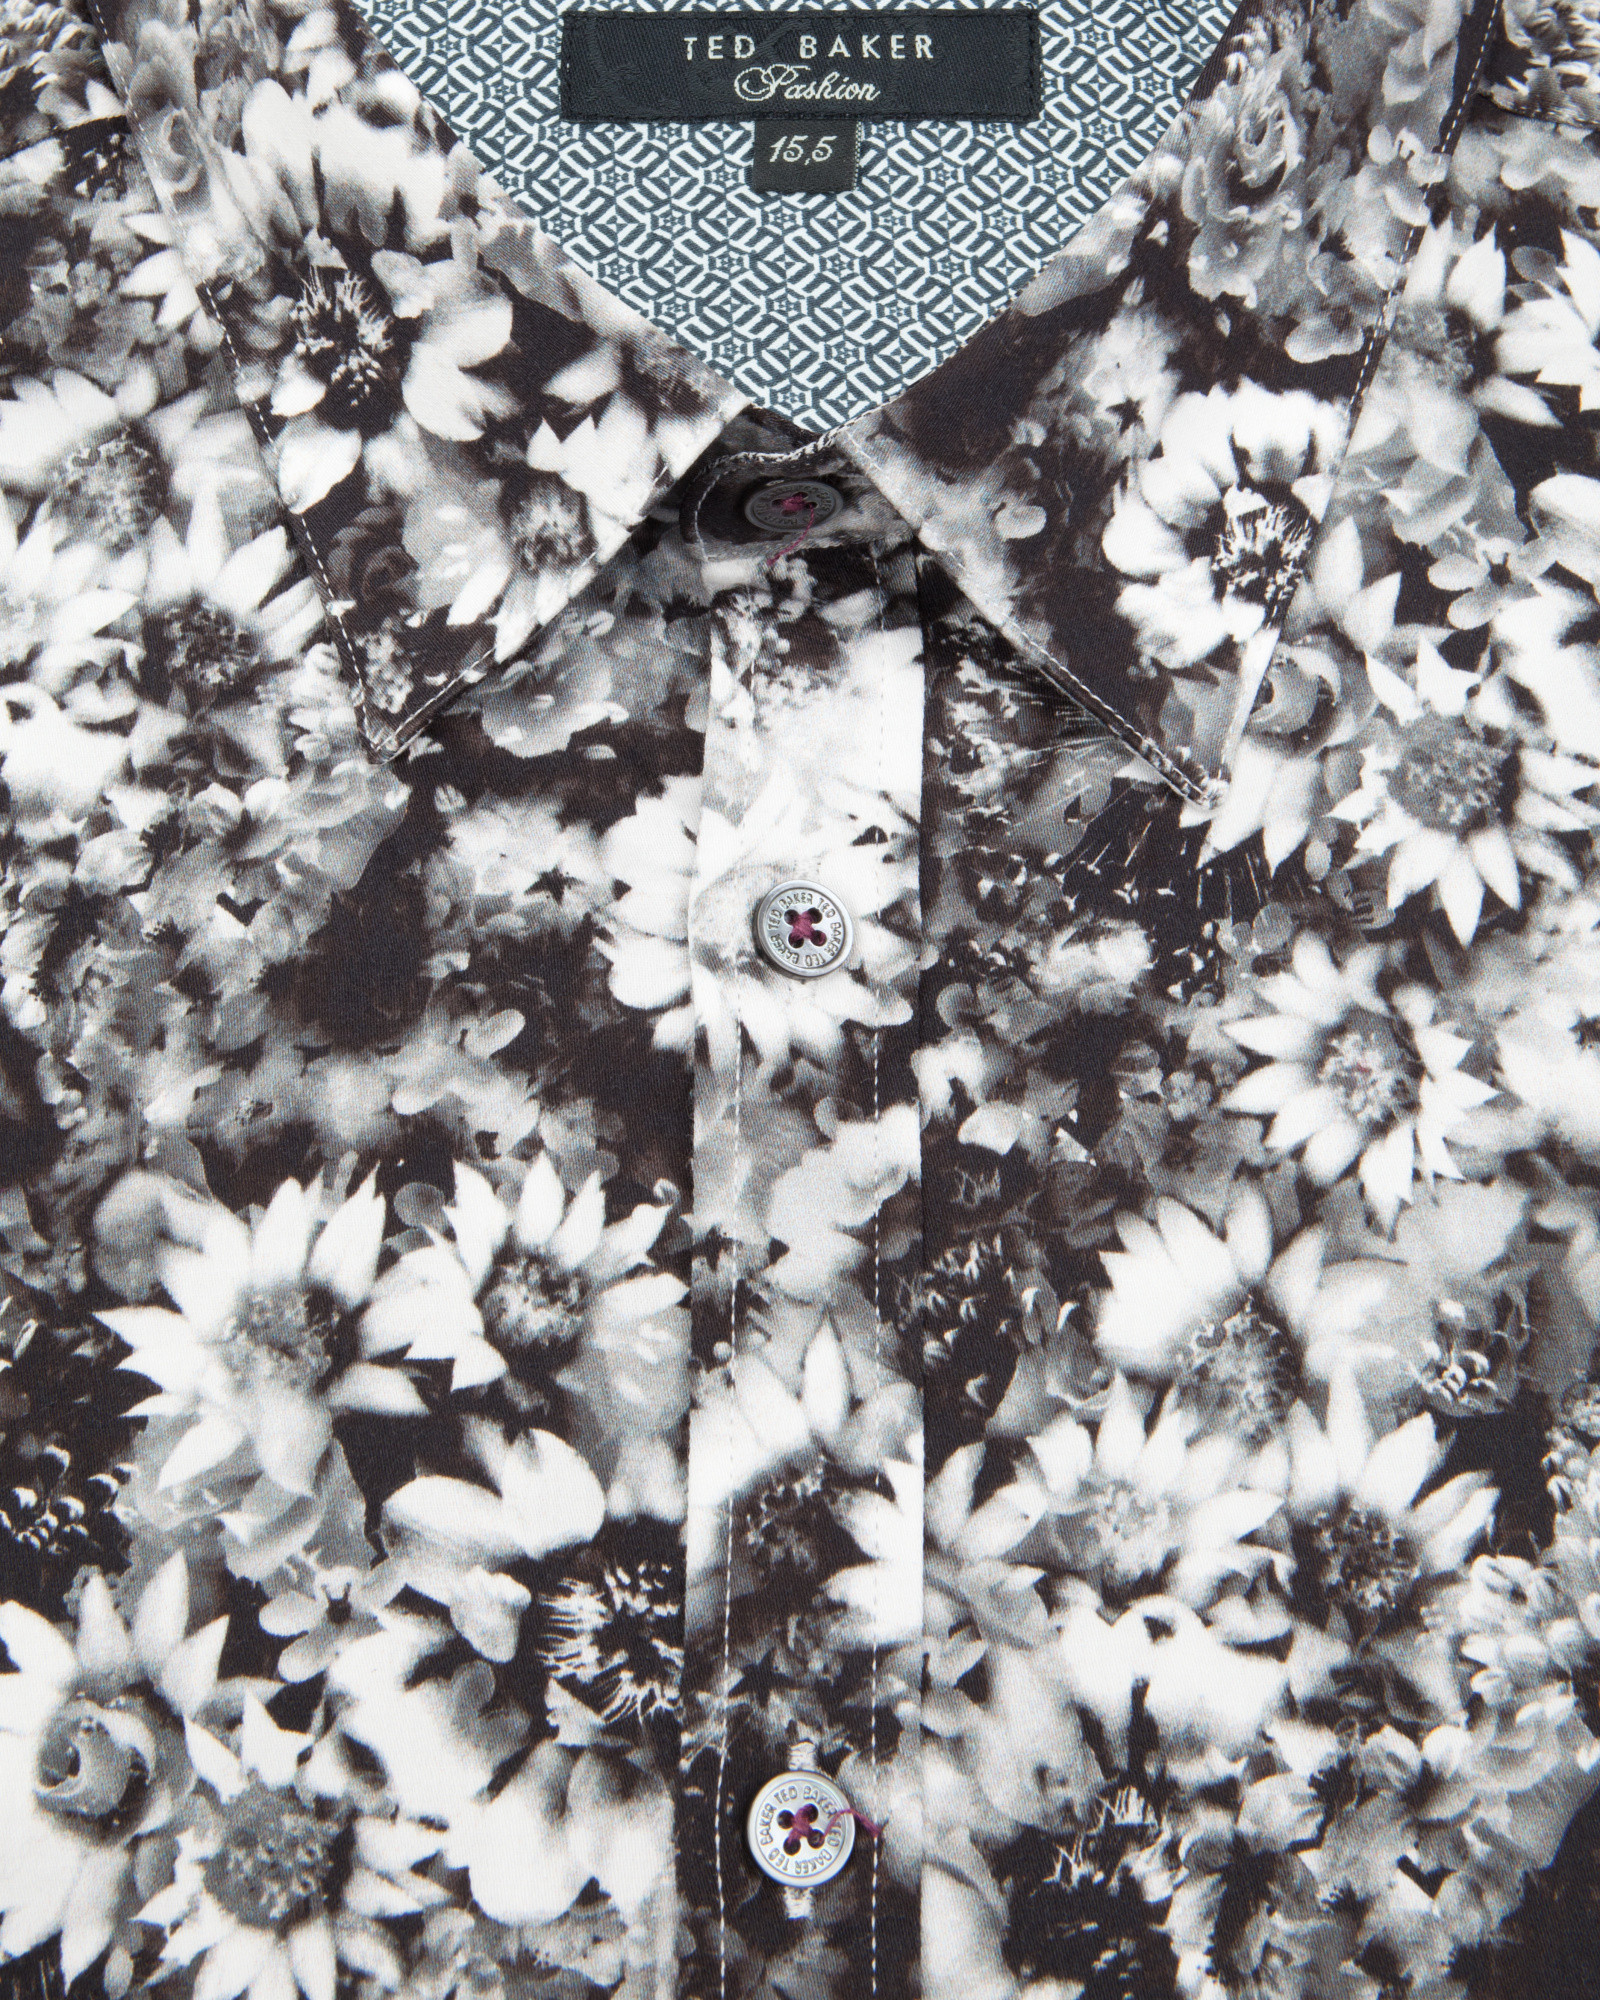 Ted Baker Cotton Printed Floral Shirt in White for Men - Lyst